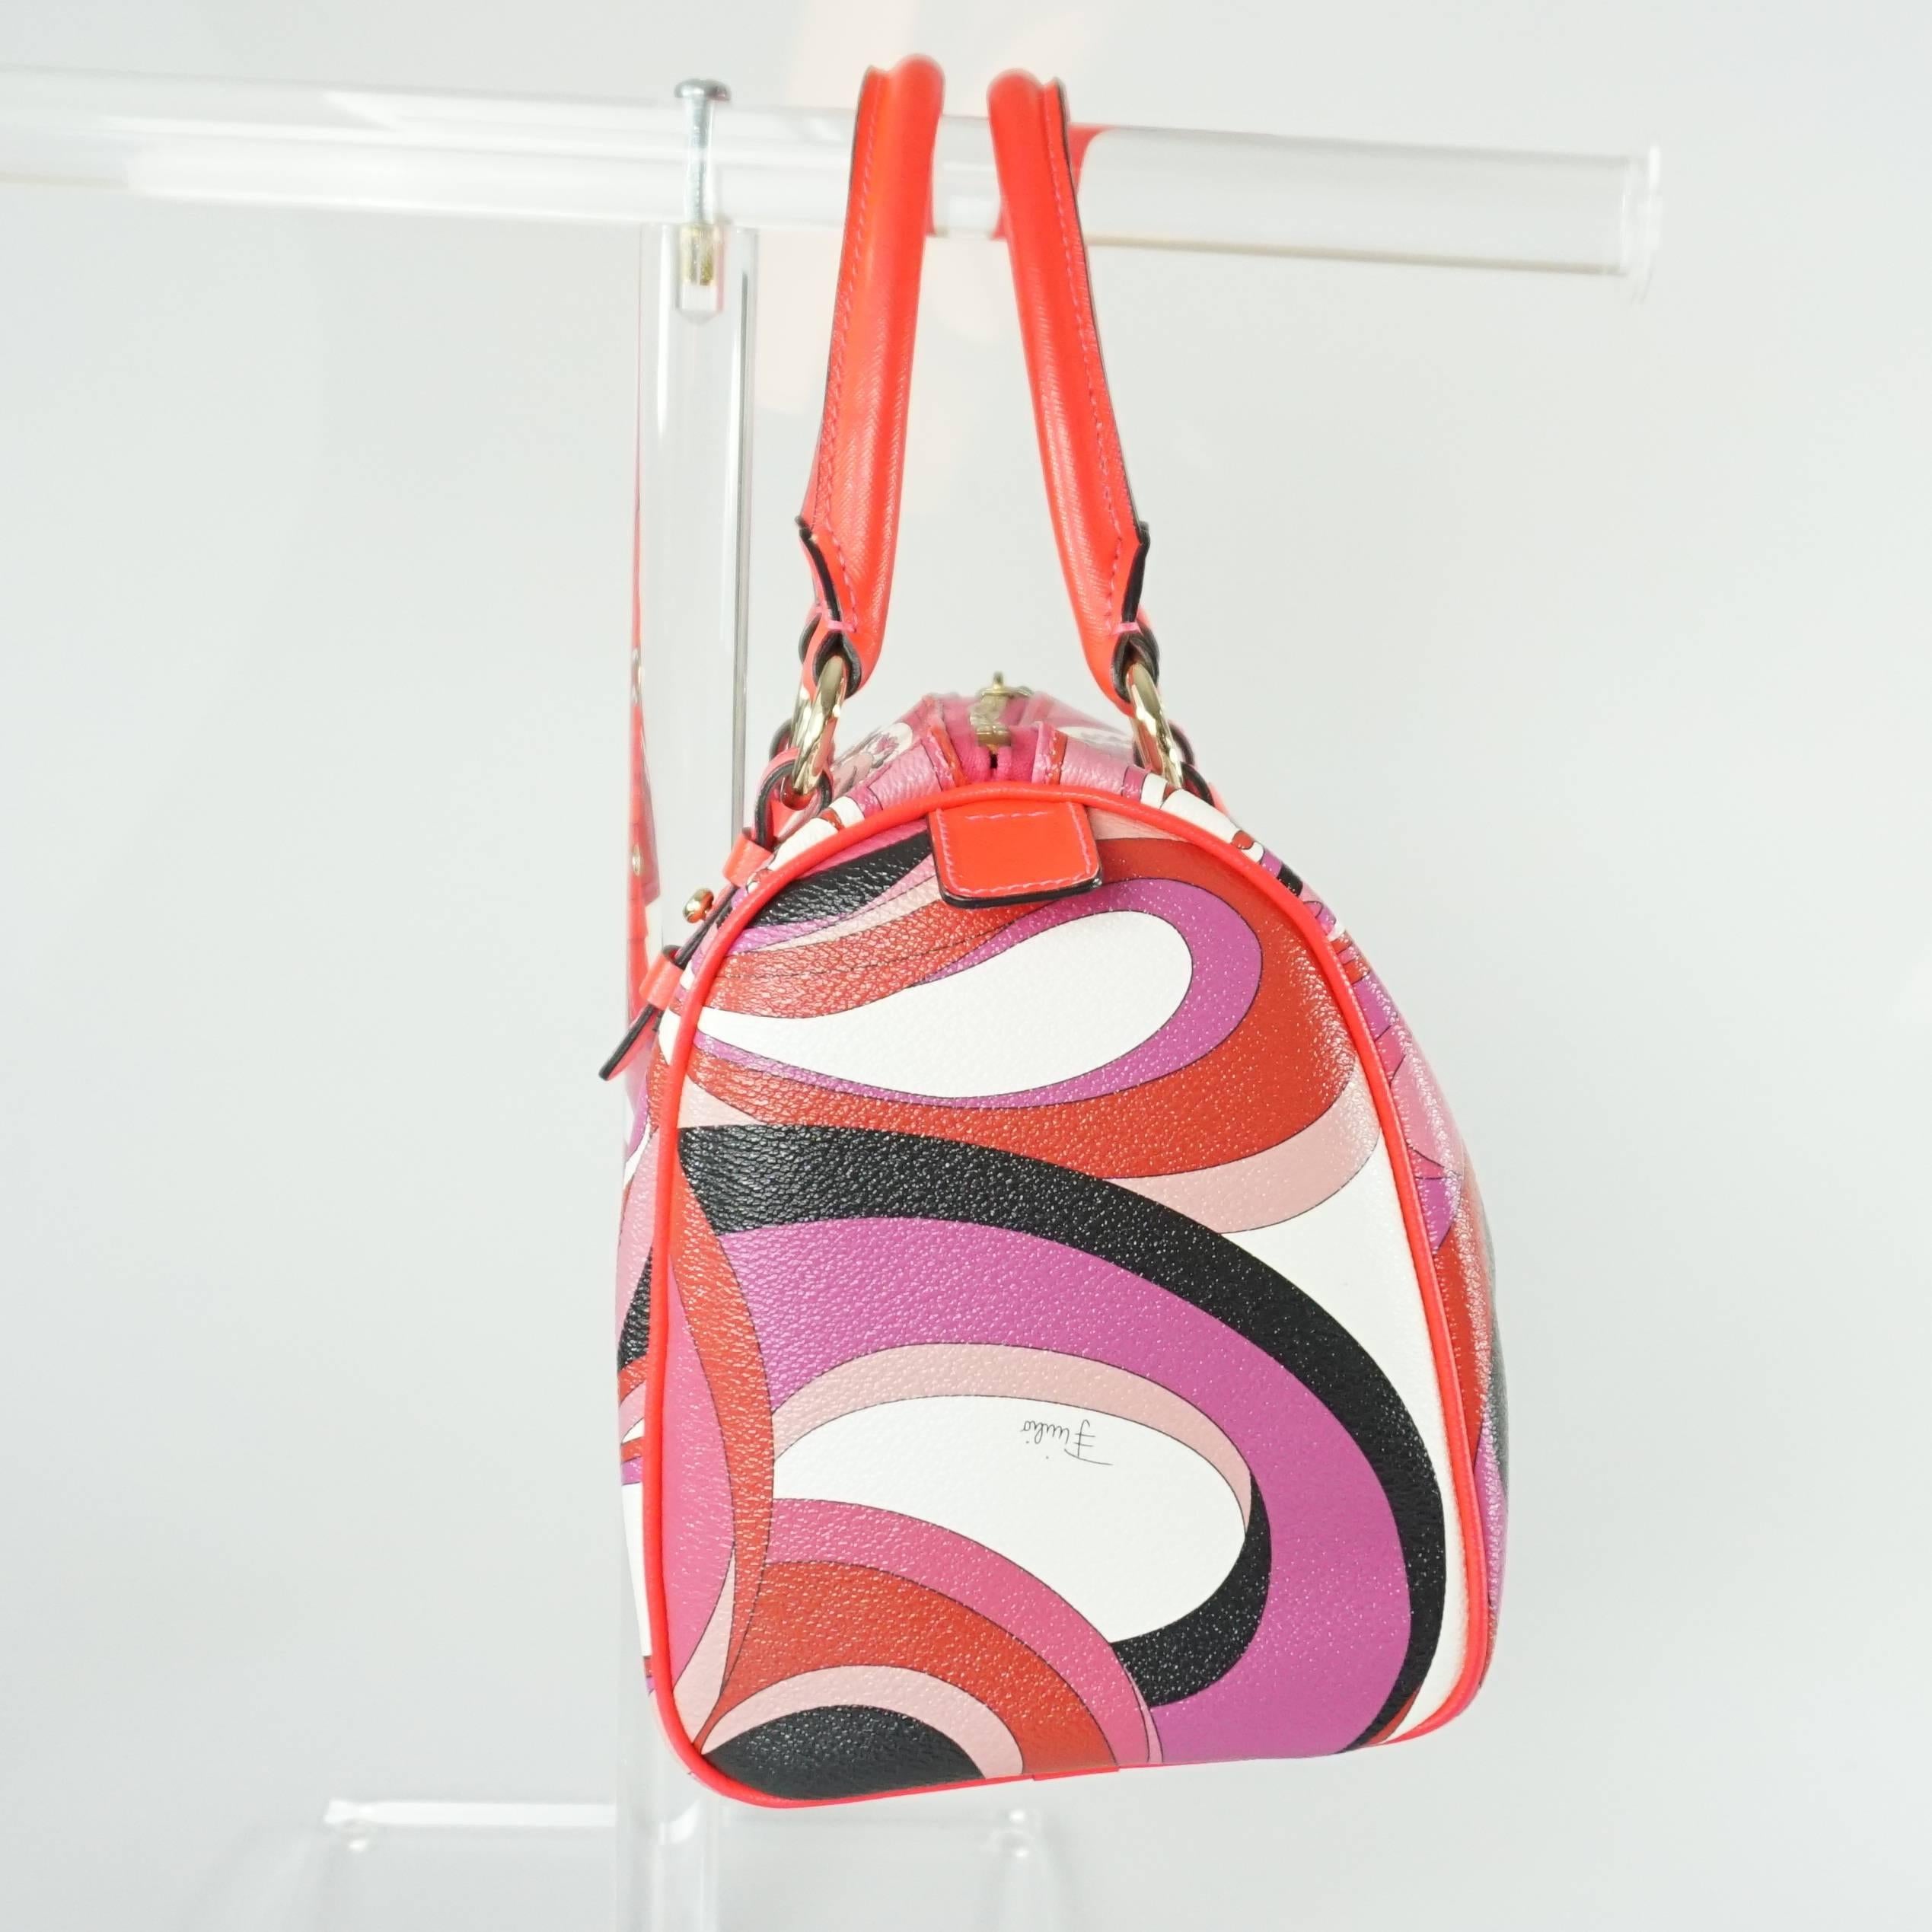 This Emilio Pucci pink printed doctor bag is a perfect summer bag. It features a geometric print in different hues of pink and neon pink handles and trim. 

It is in excellent condition with very minor wear. 

Measurements
Height: 8.5